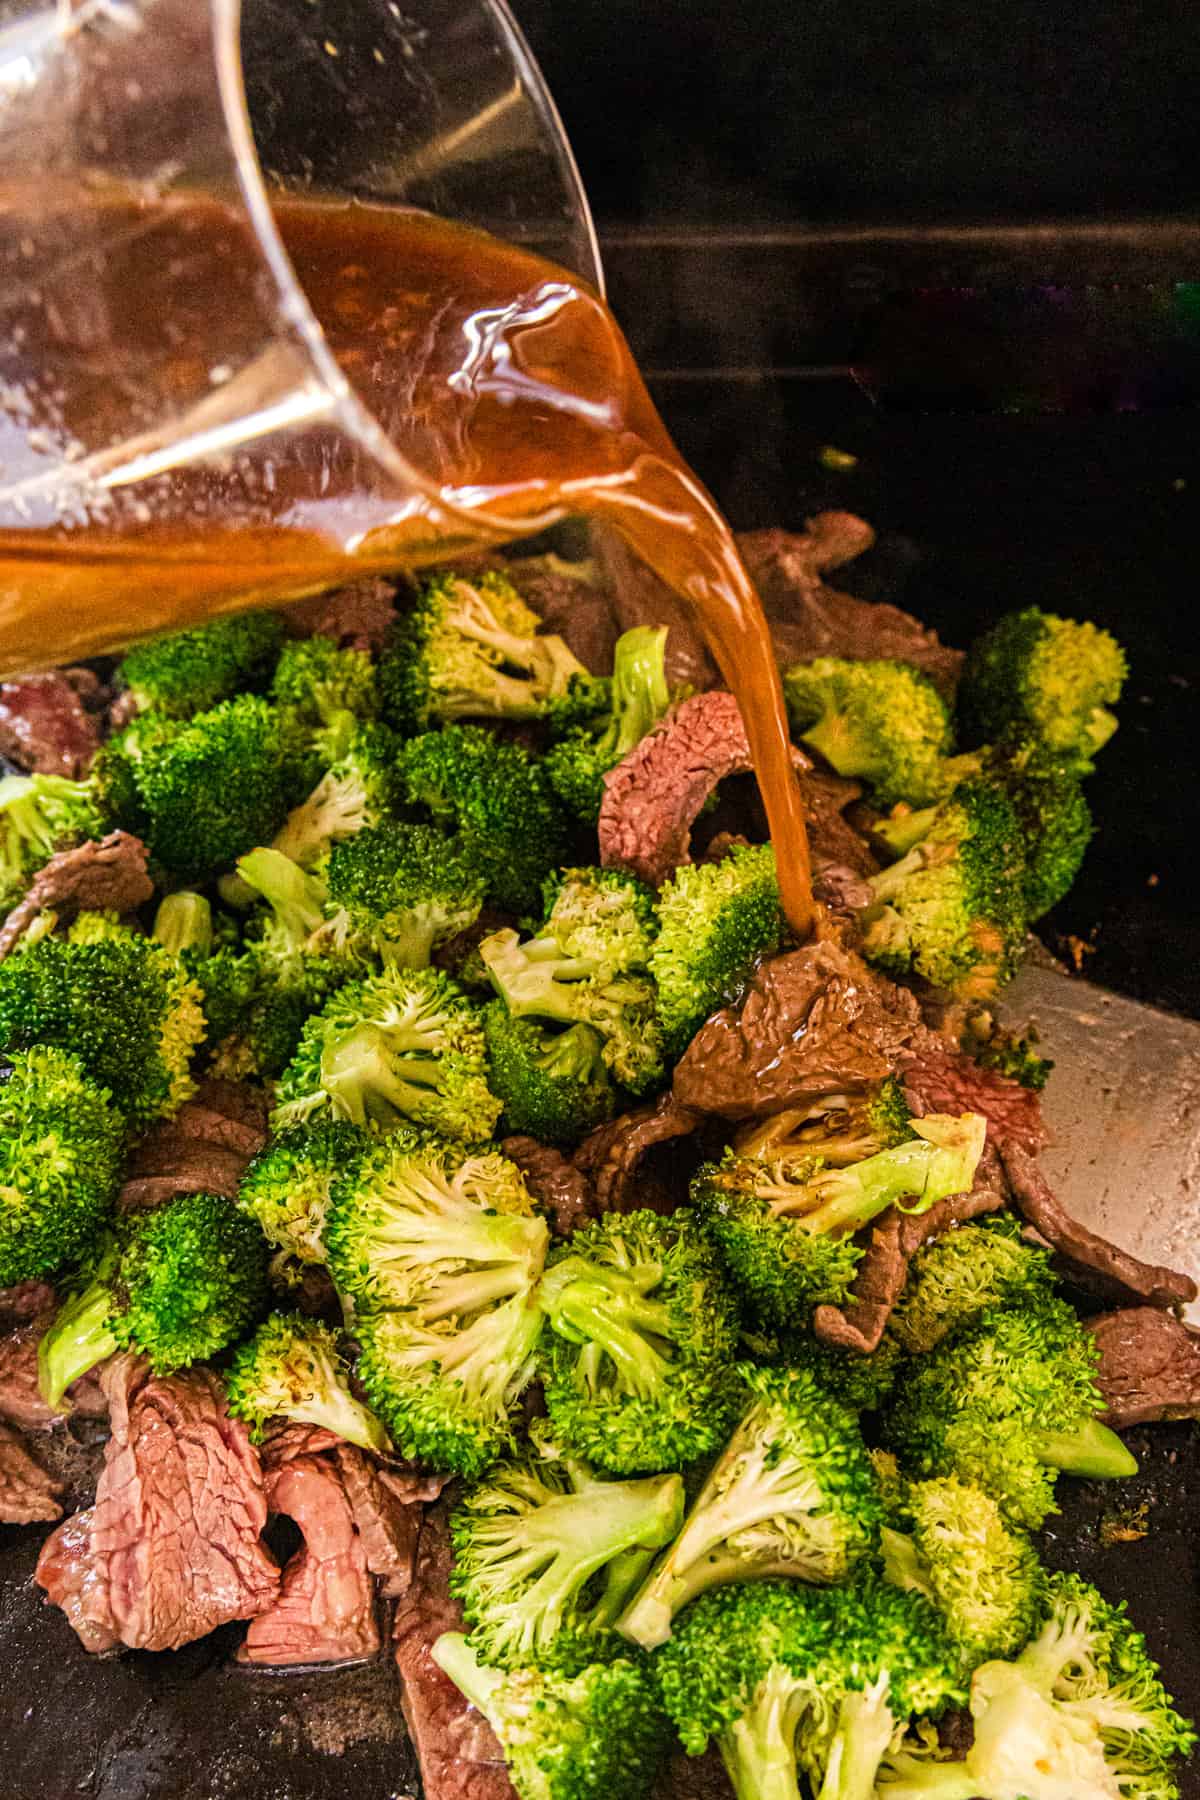 Pouring Blackstone Beef & Broccoli sauce over cooked ingredients on griddle